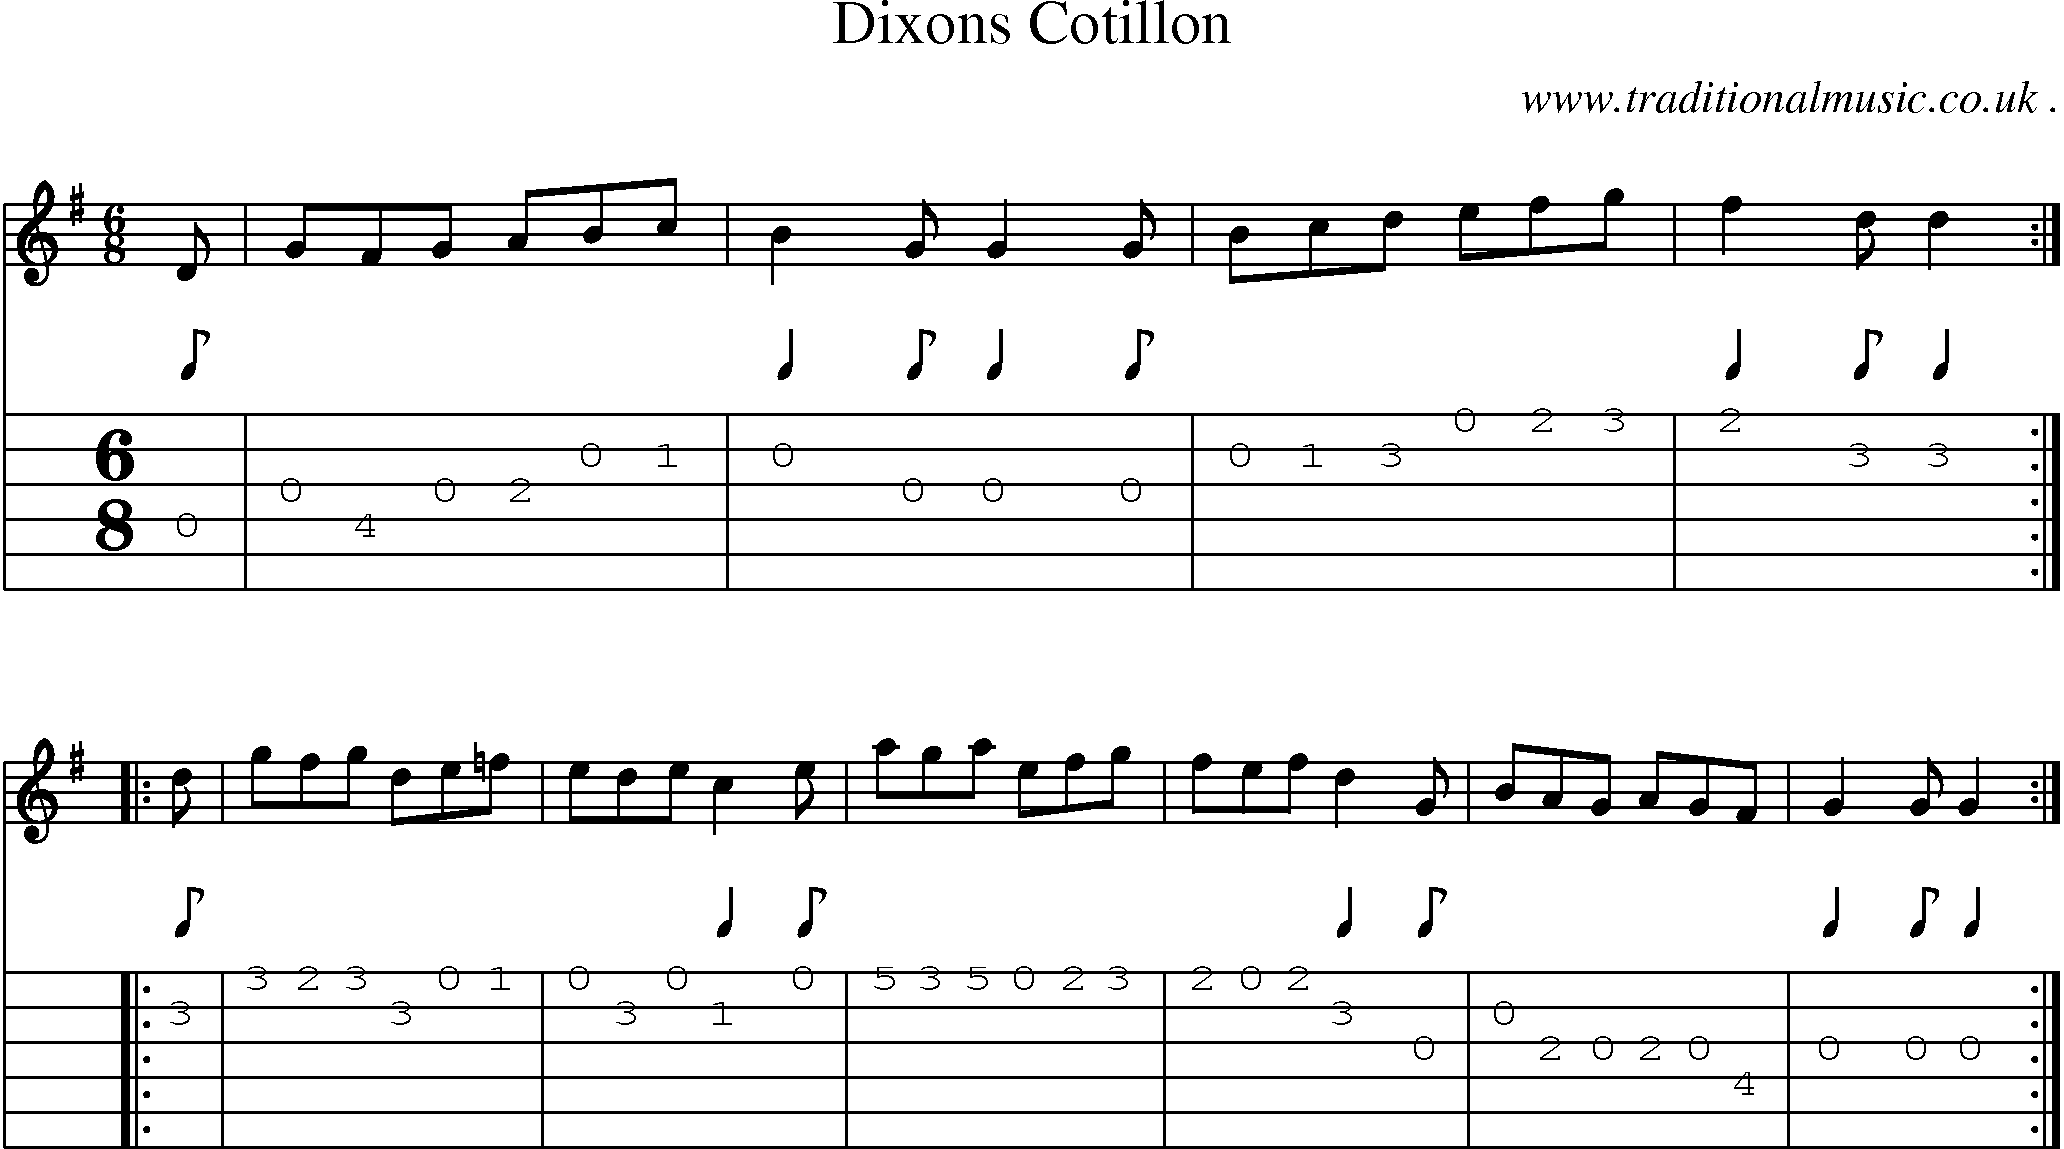 Sheet-Music and Guitar Tabs for Dixons Cotillon